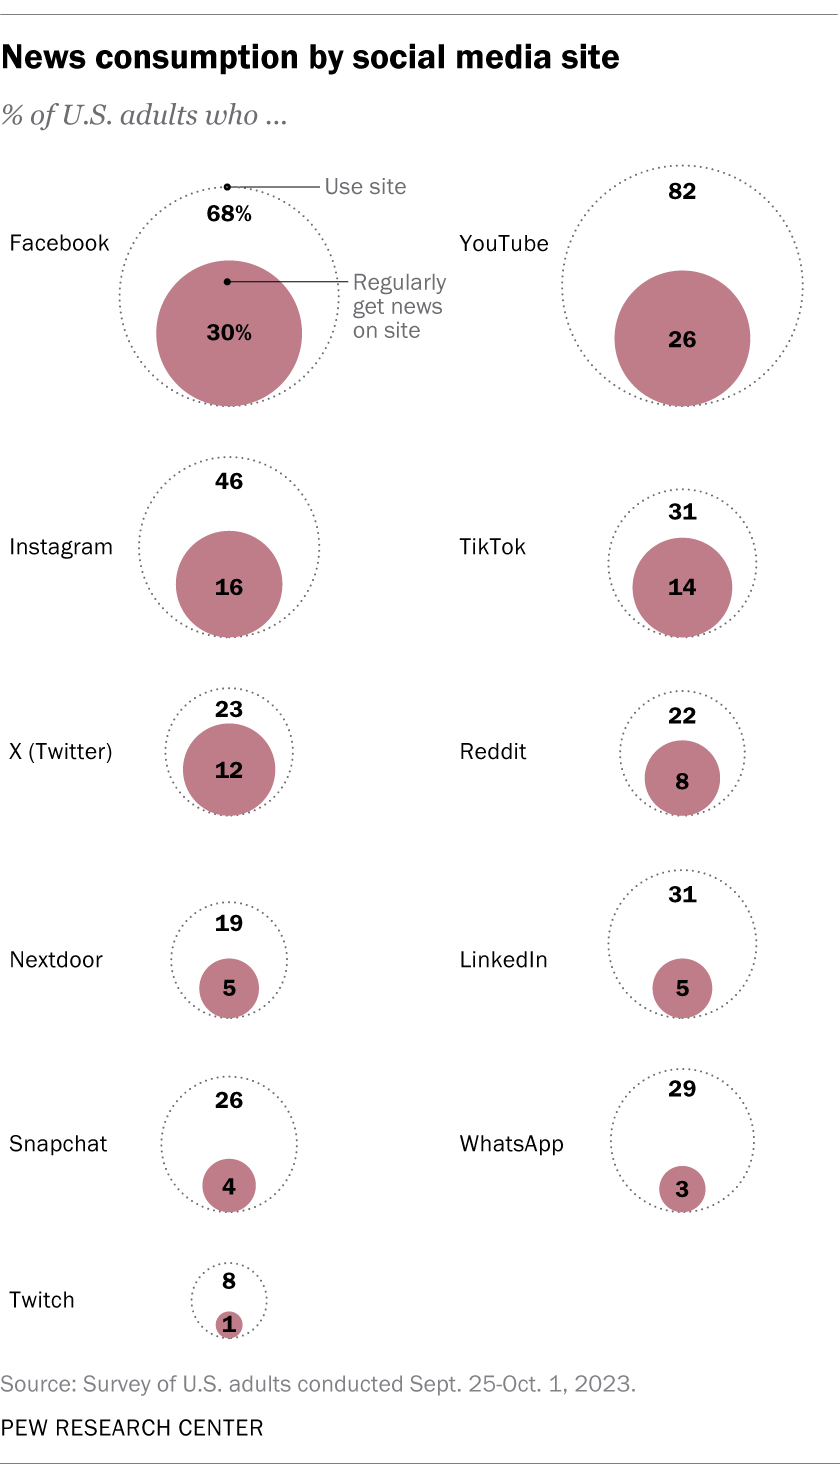 Circular area charts comparing U.S. adults who regularly get news on to total users by social media site